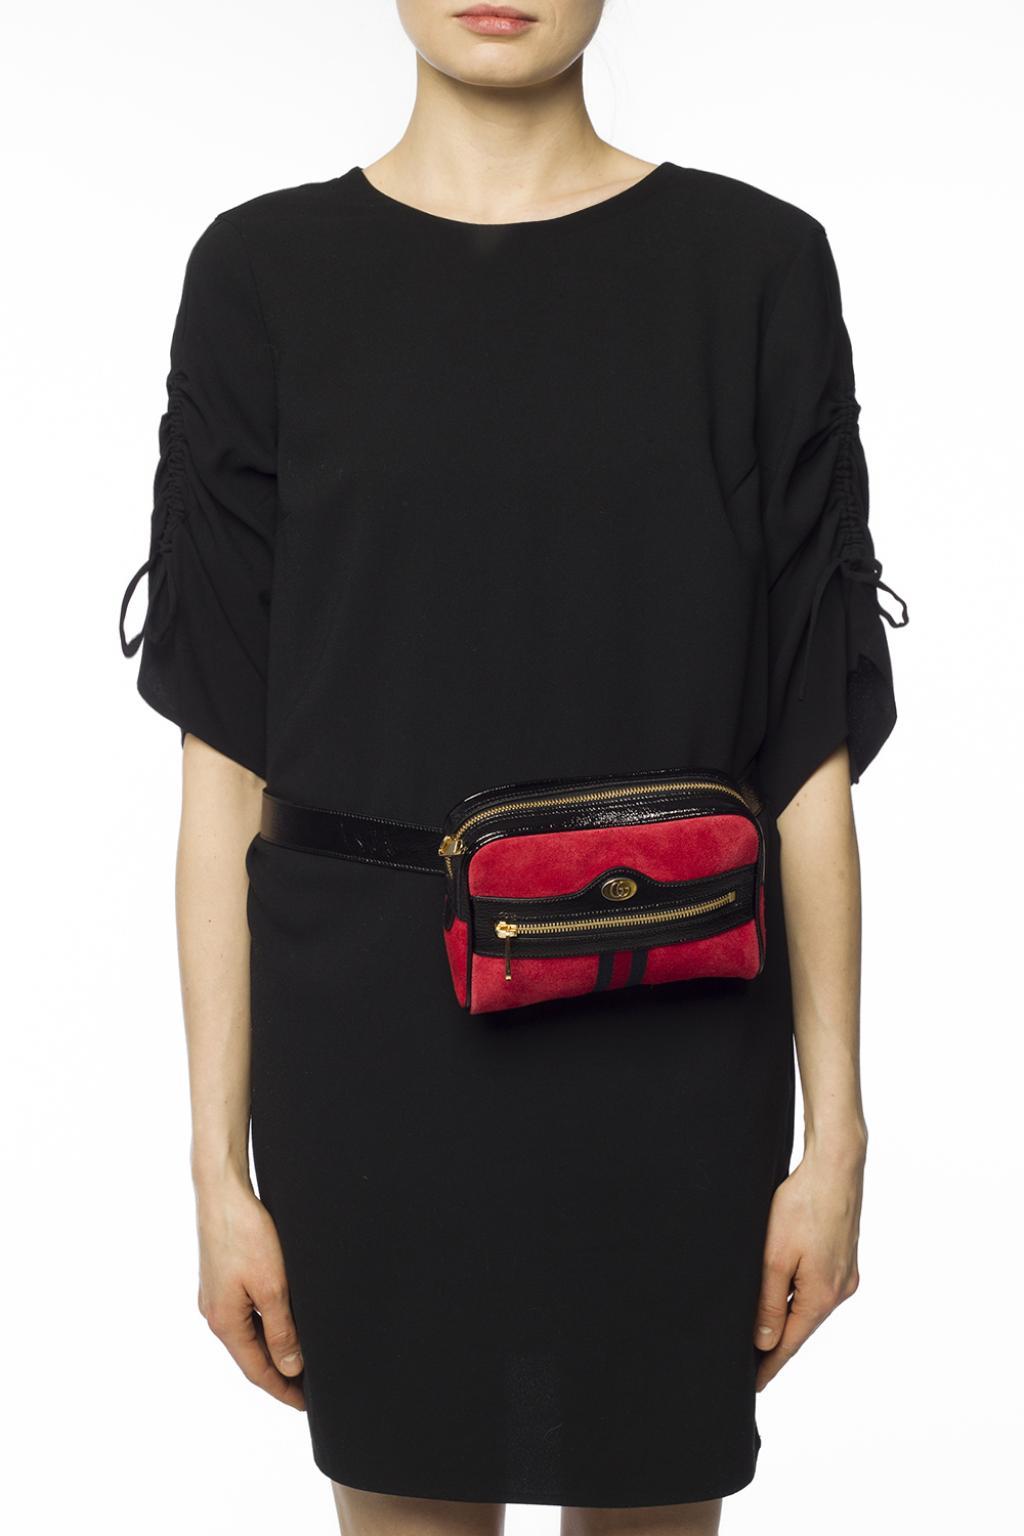 Gucci Leather &#39;ophidia&#39; Belt Bag in Red for Men - Lyst